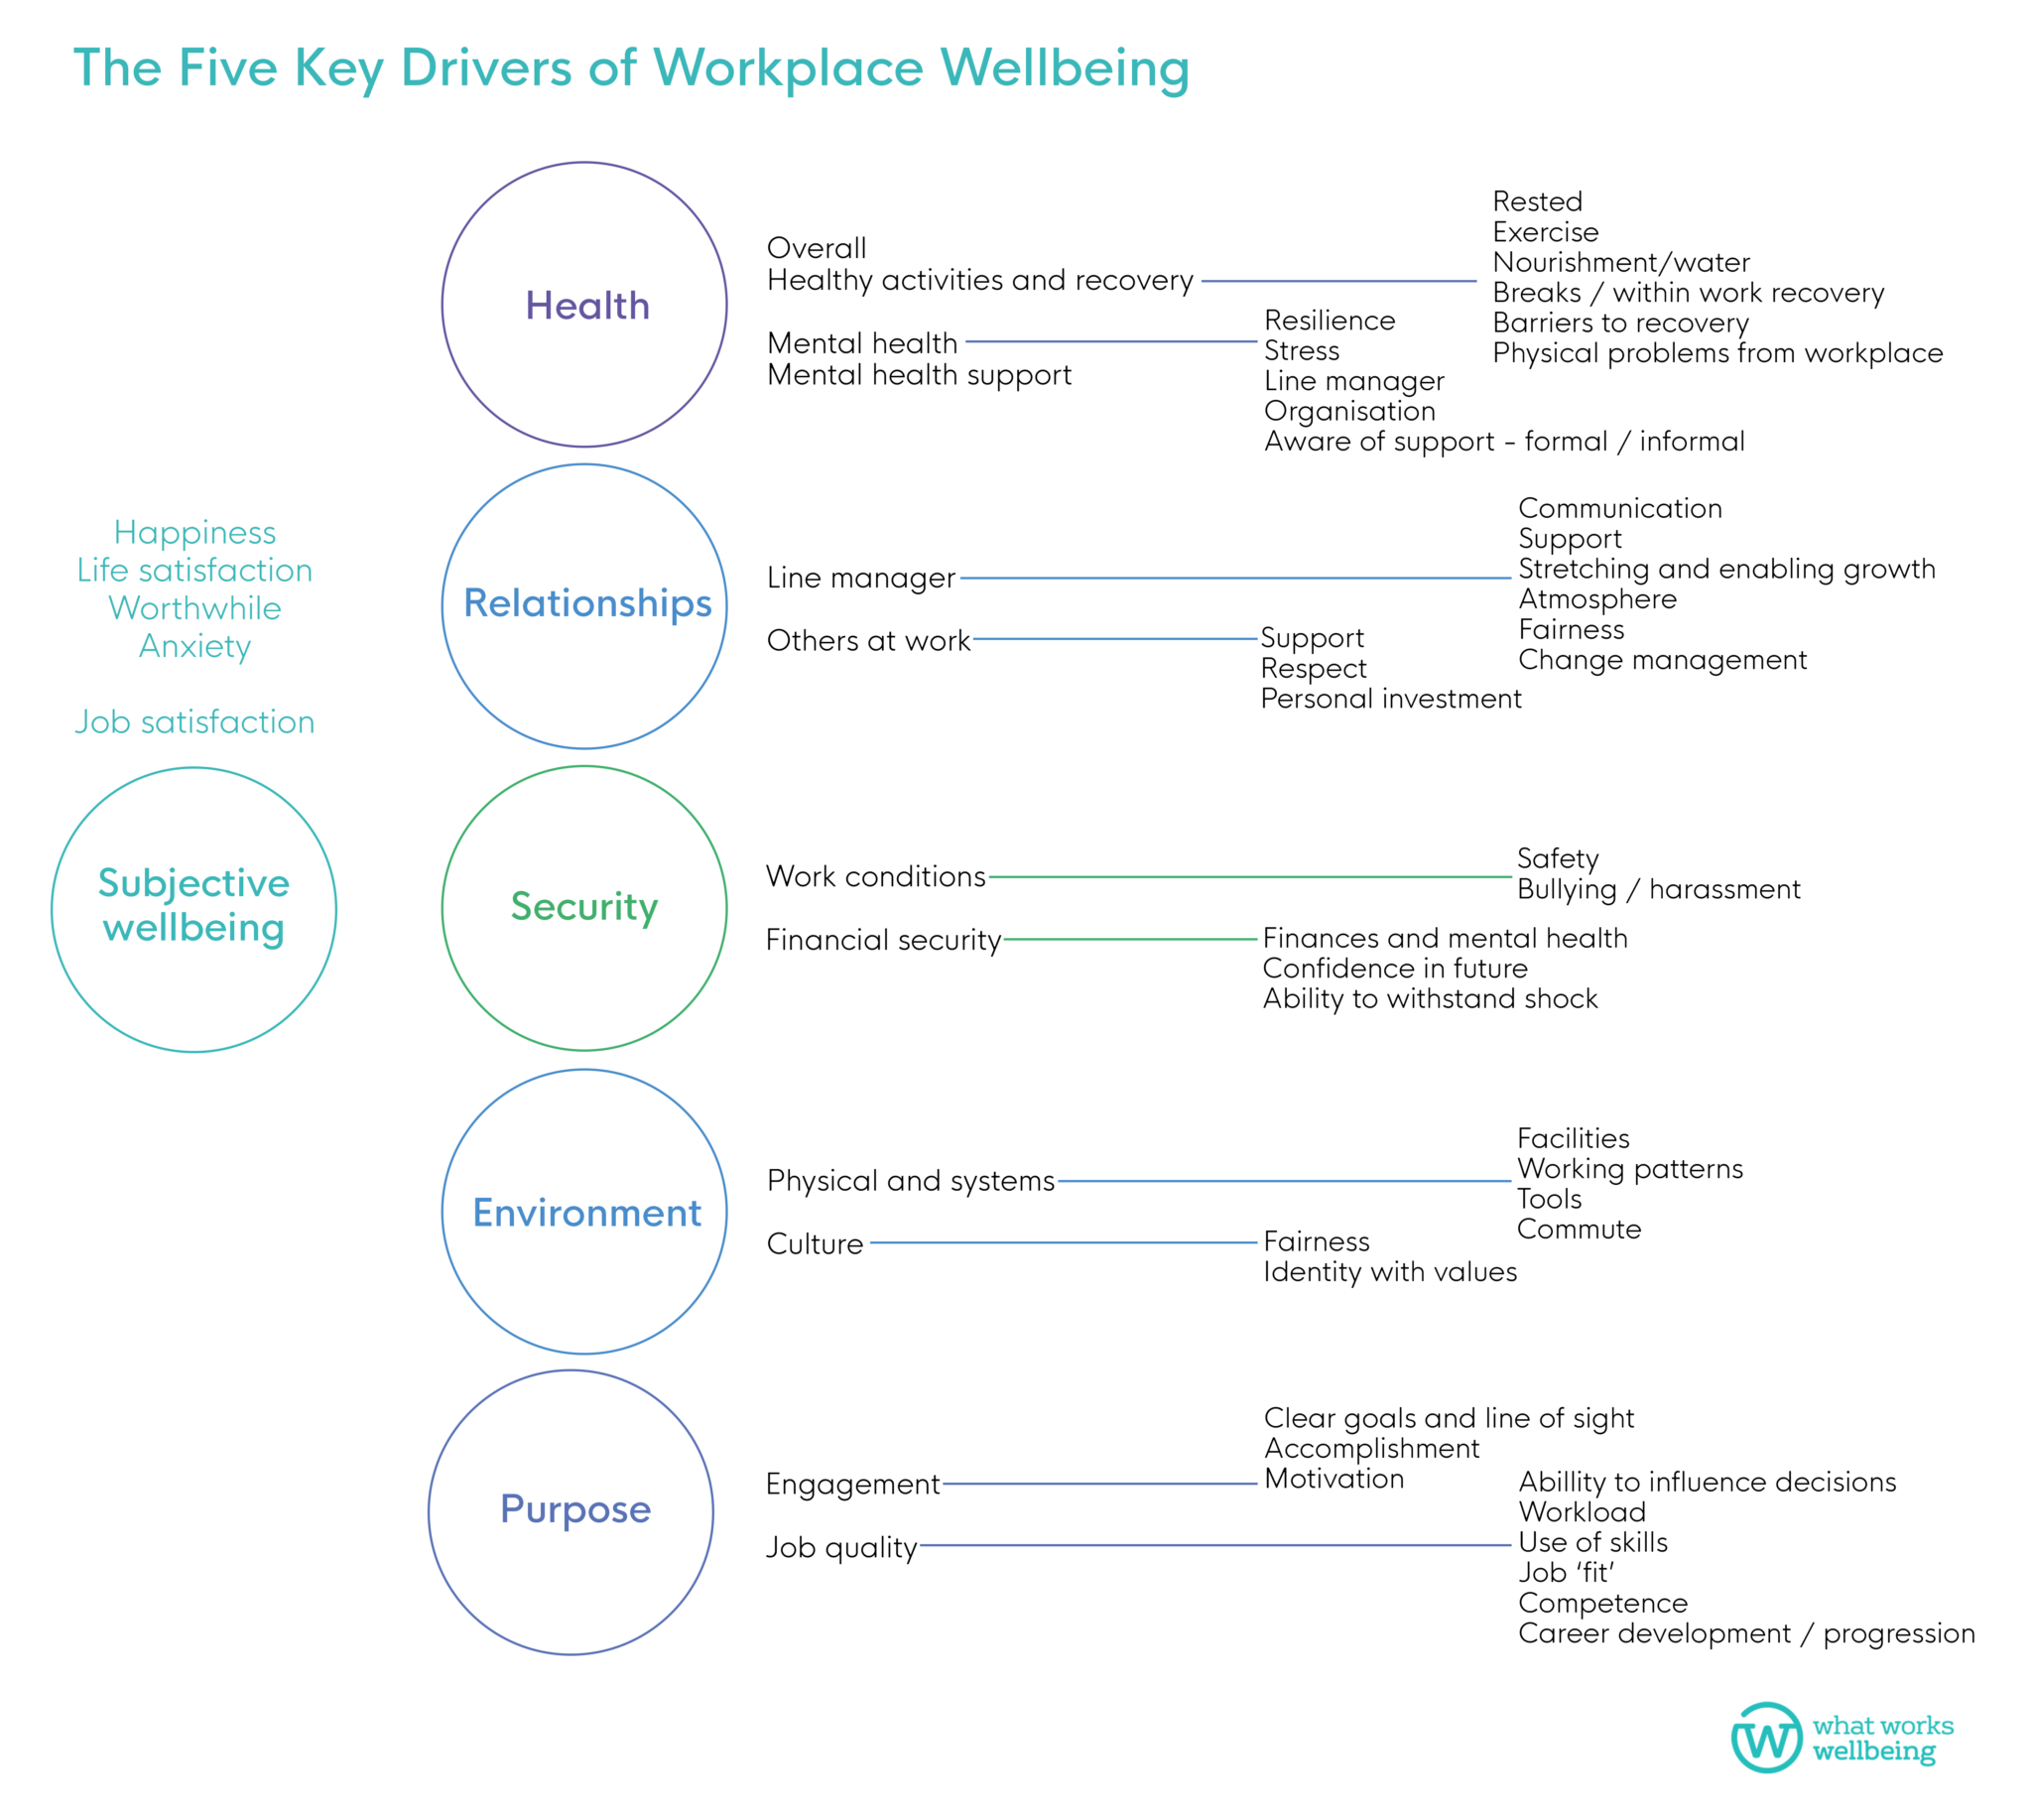 transition and wellbeing research programme key findings report